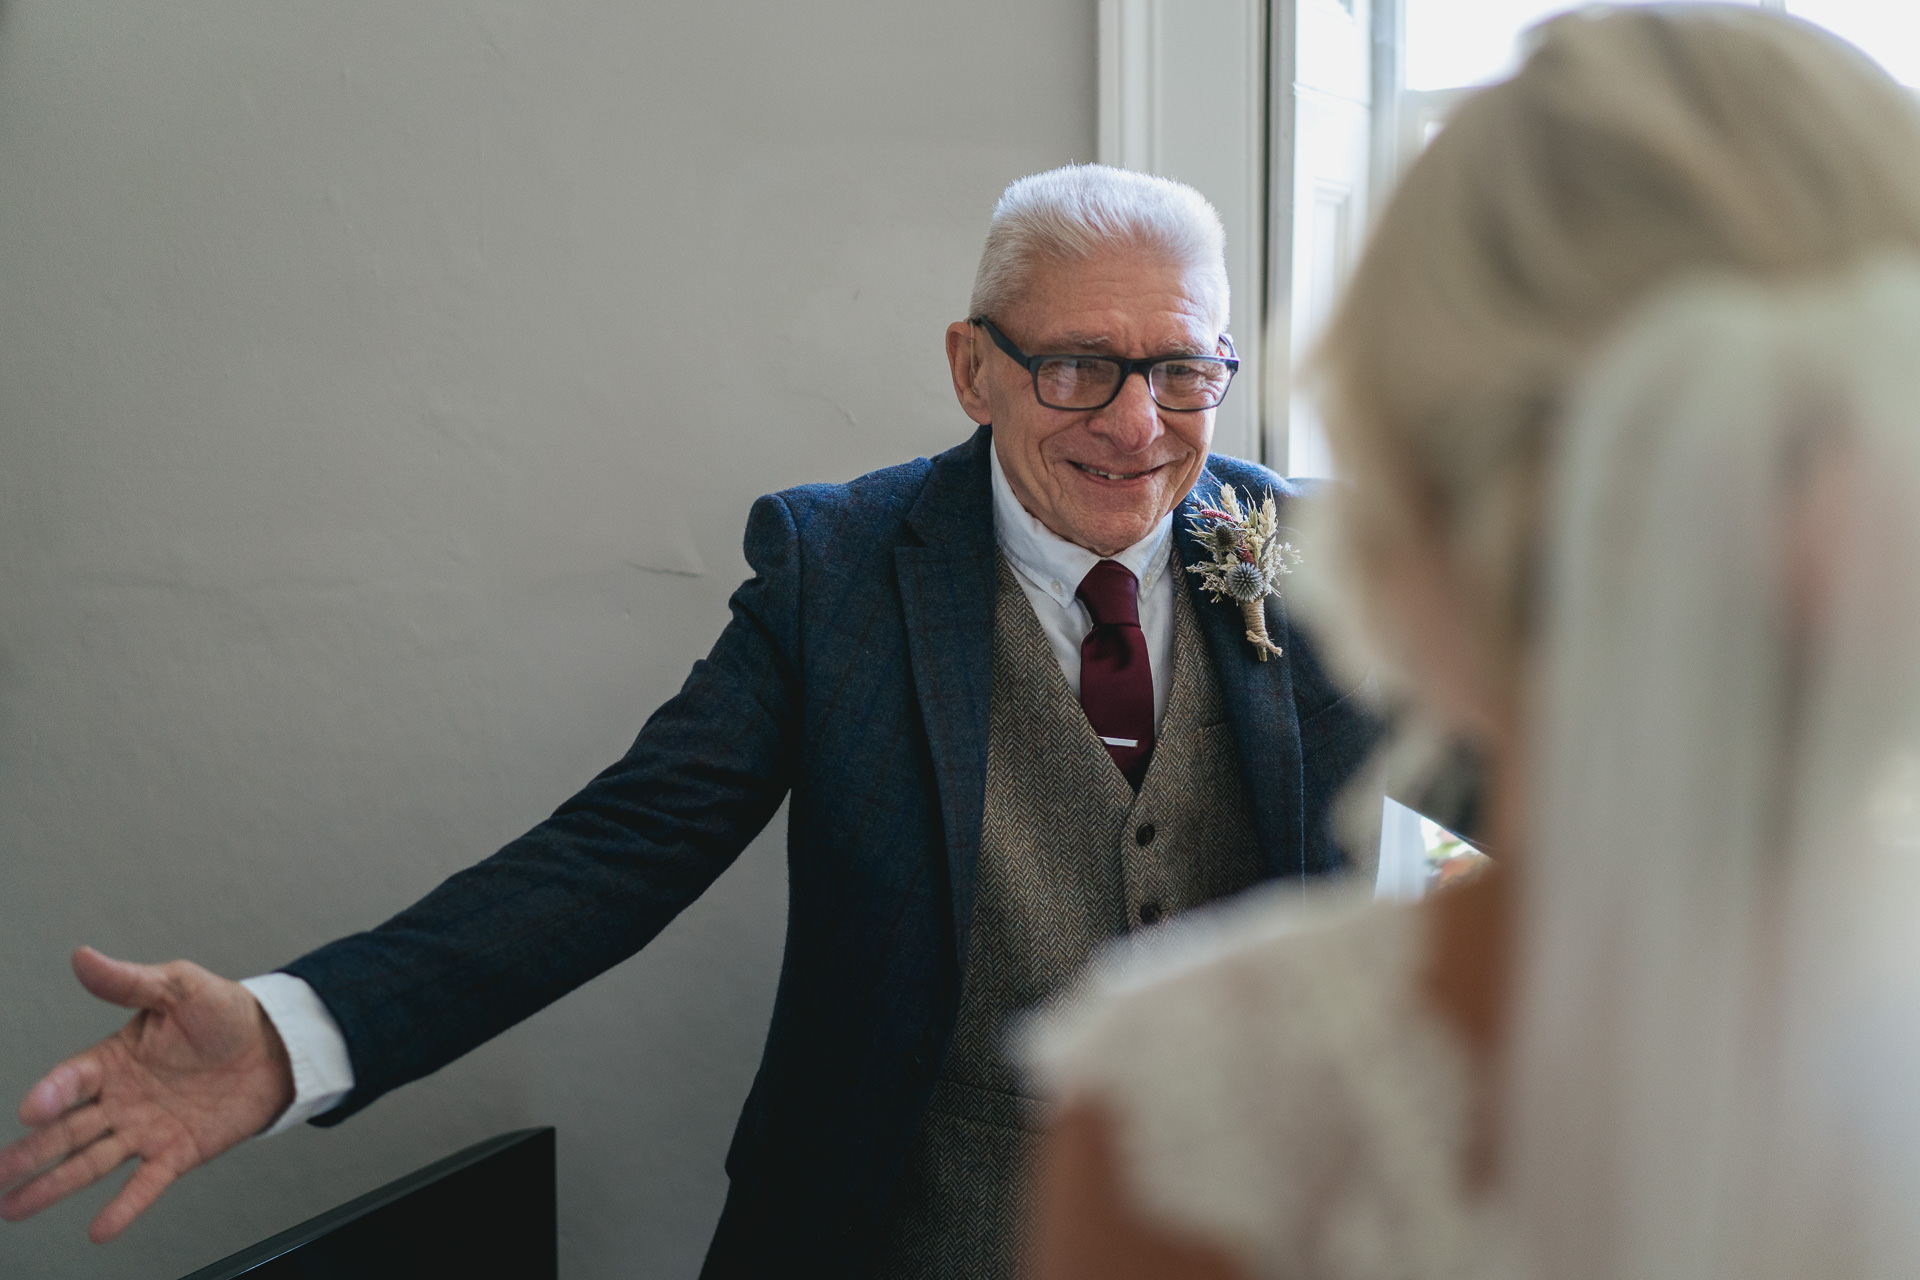 Father of the bride opening arms to greet her